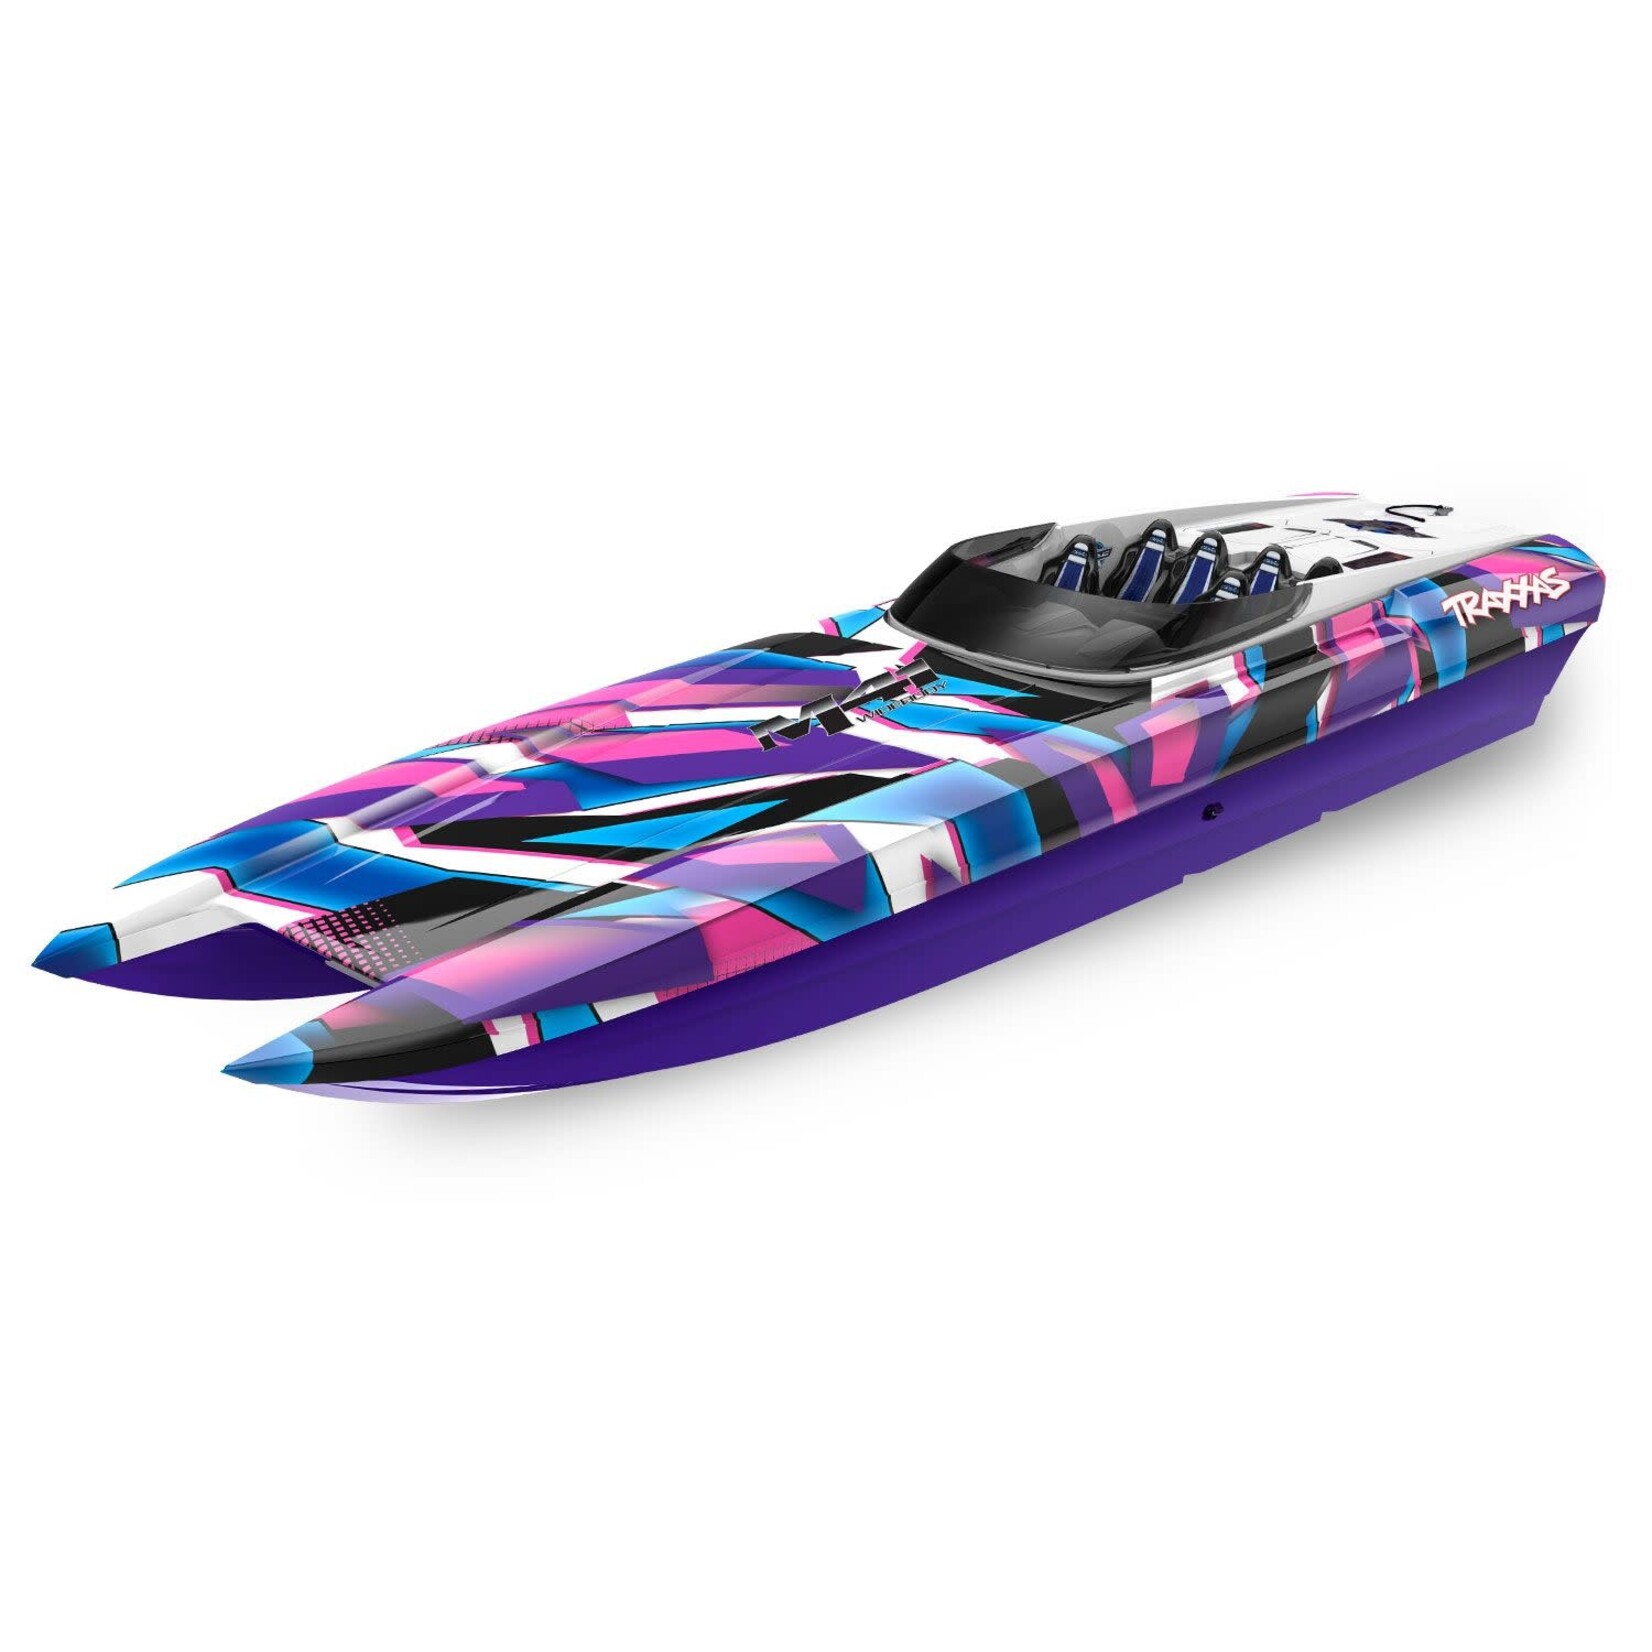 Traxxas 57046-4-PRPL DCB M41 Widebody:  Brushless 40' Race Boat with TQi™ Traxxas Link™ Enabled 2.4GHz Radio System & Traxxas Stability Management (TSM)®